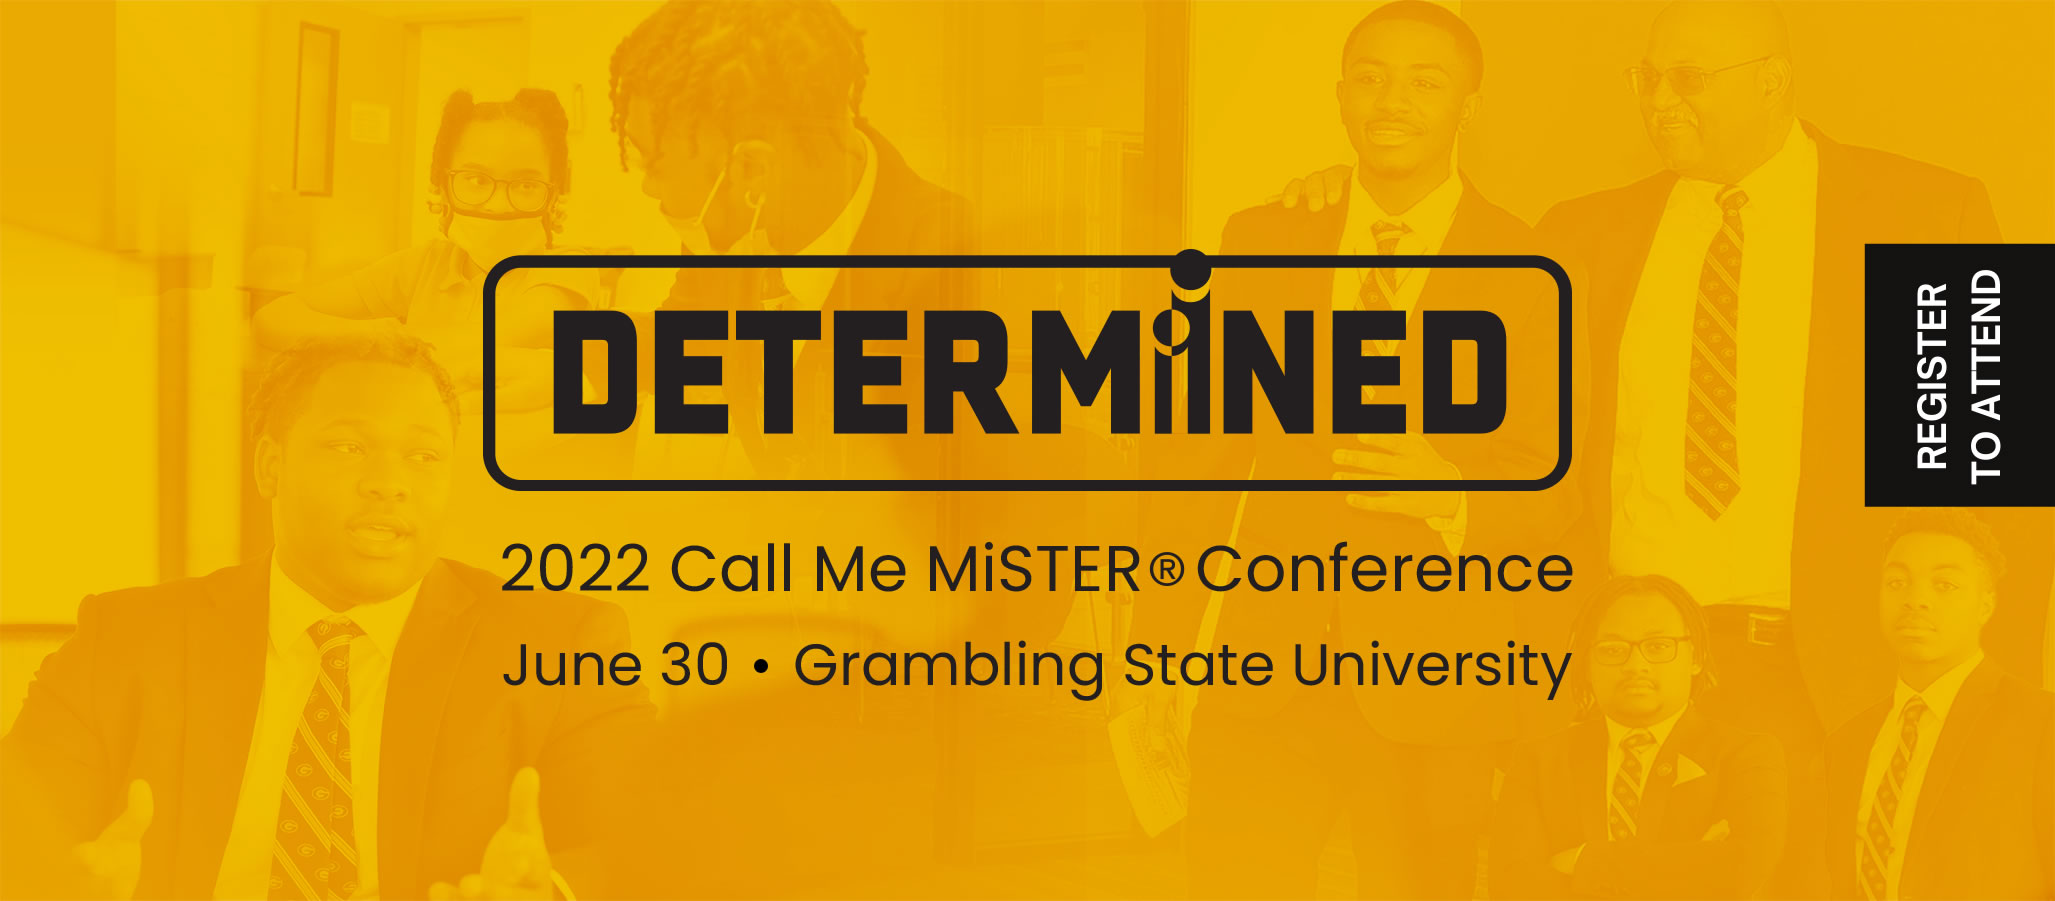 2022 Call Me MiSTER Conference - June 30, Grambling State University